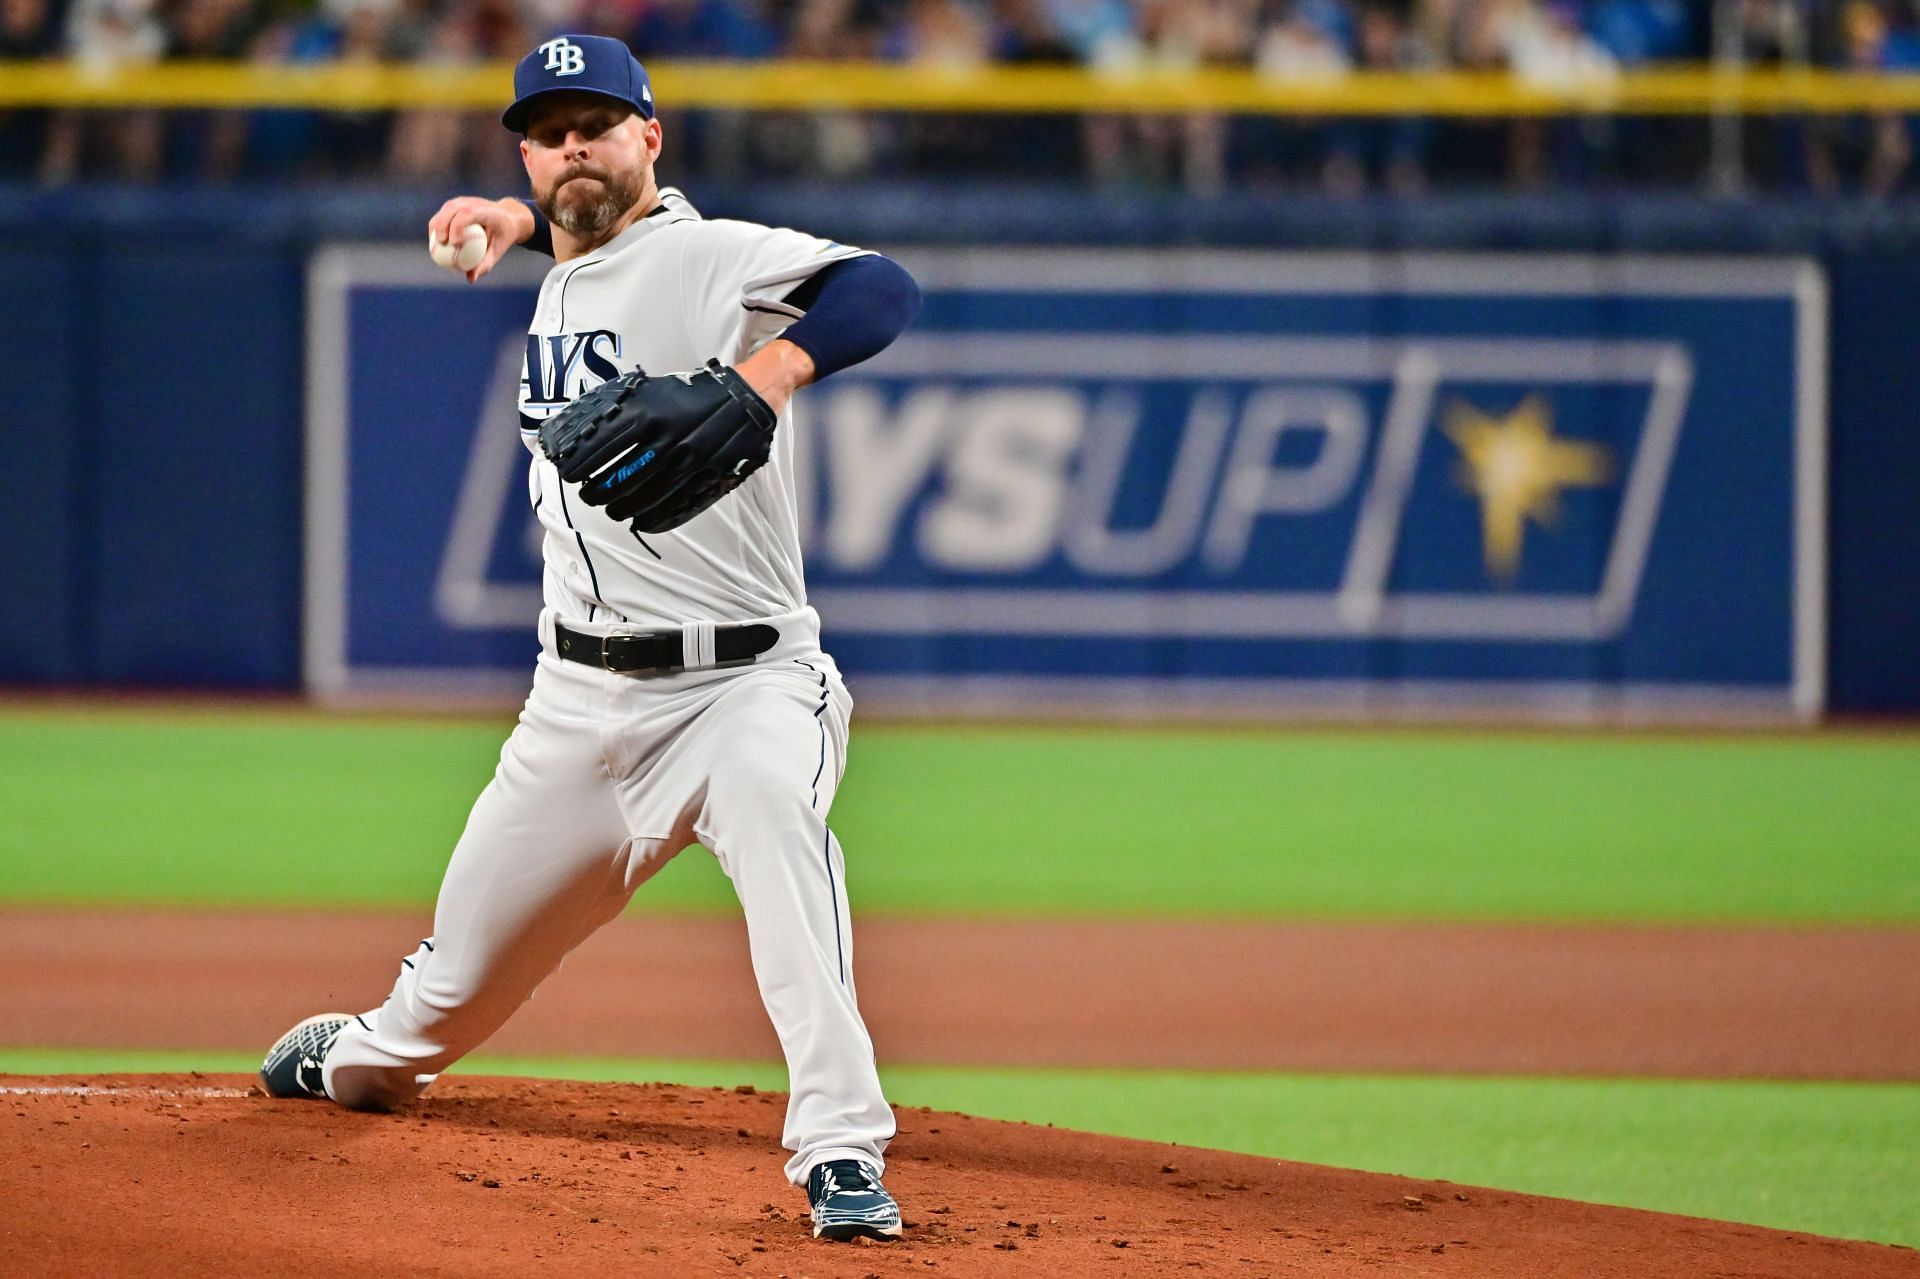 Tampa Bay Rays SP Corey Kluber got lit up by the Los Angeles Angels his last time out